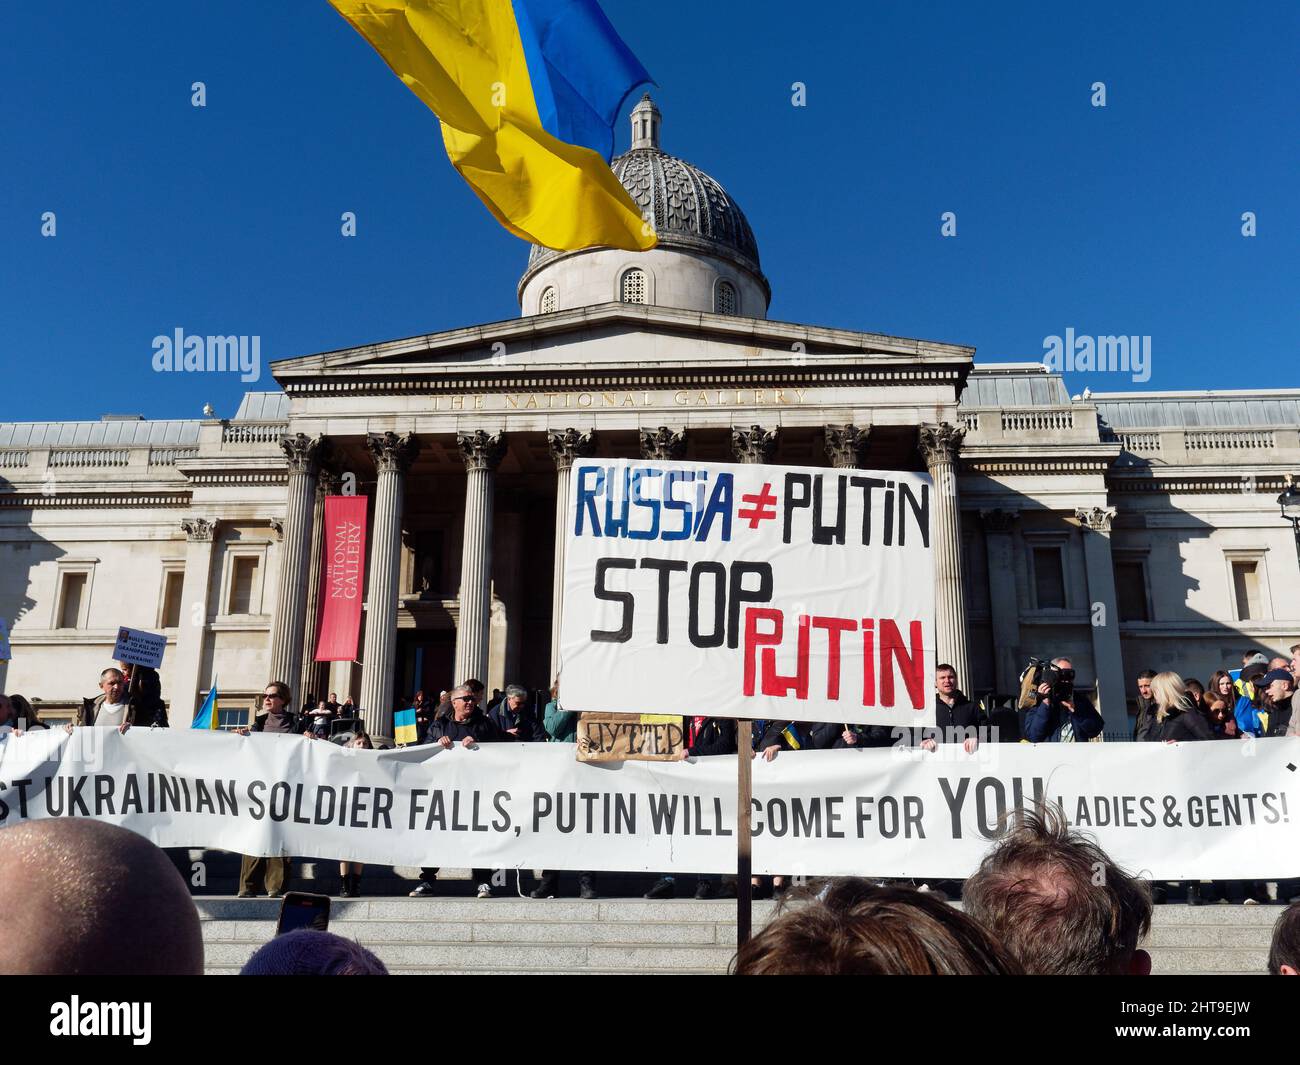 View of anti-Putin and anti-Russian banners in front of the National Gallery in Trafalgar Square London to protest at the Russian invasion of Ukraine Stock Photo